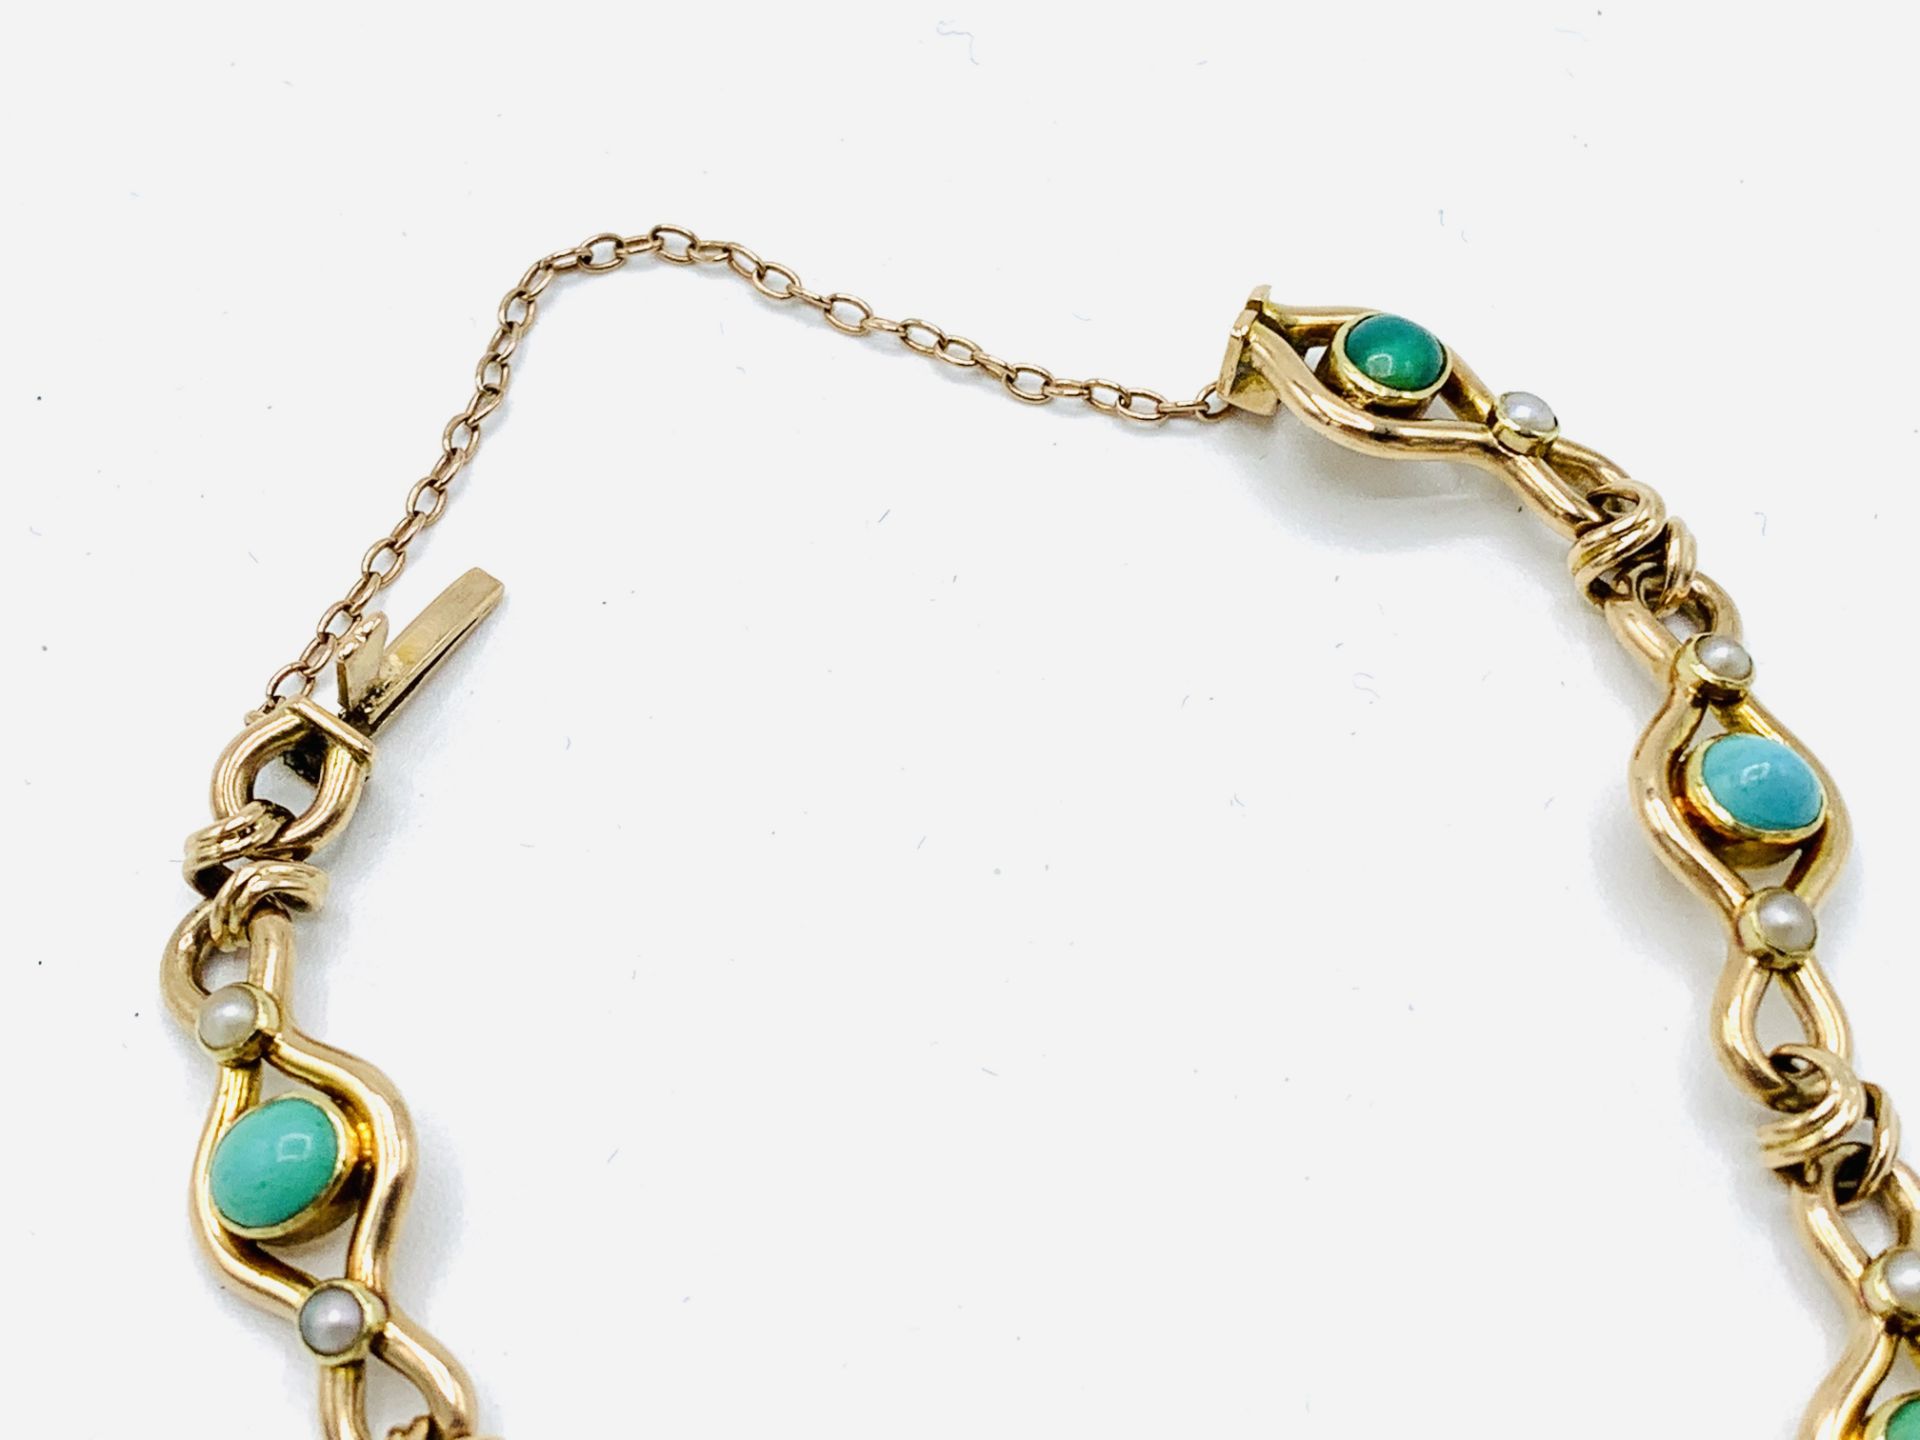 Victorian 15ct rose gold turquoise and seed pearl bracelet - Image 3 of 4